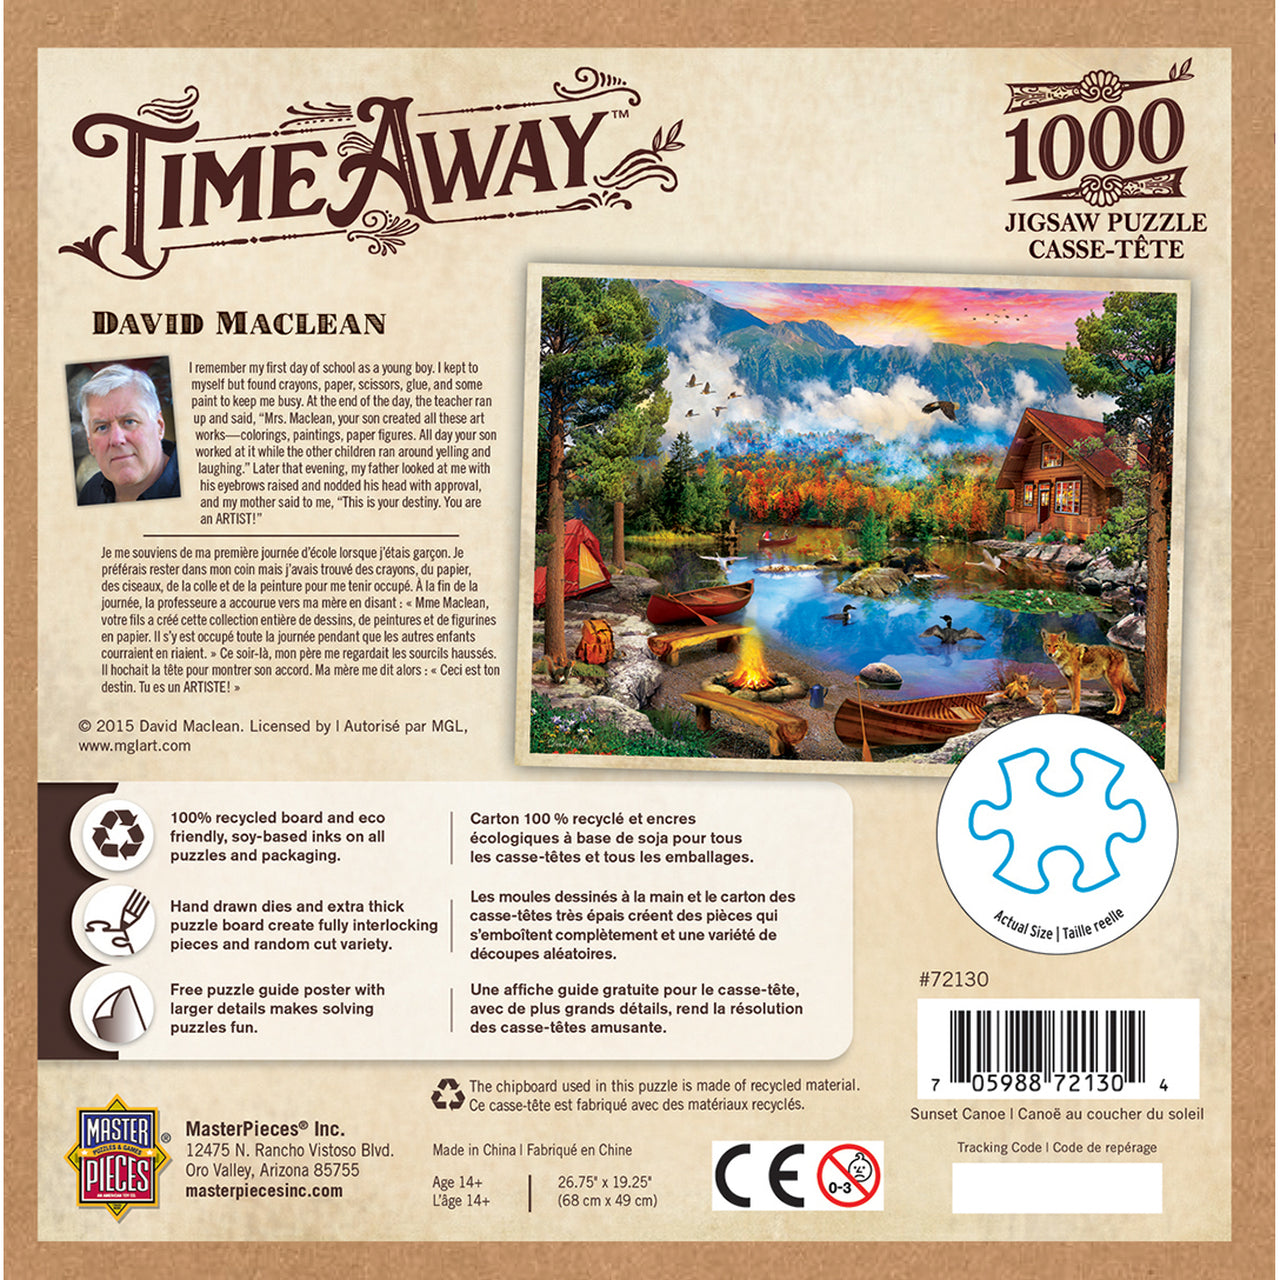 Time Away - Sunset Canoe 1000 Piece Jigsaw Puzzle by Masterpieces